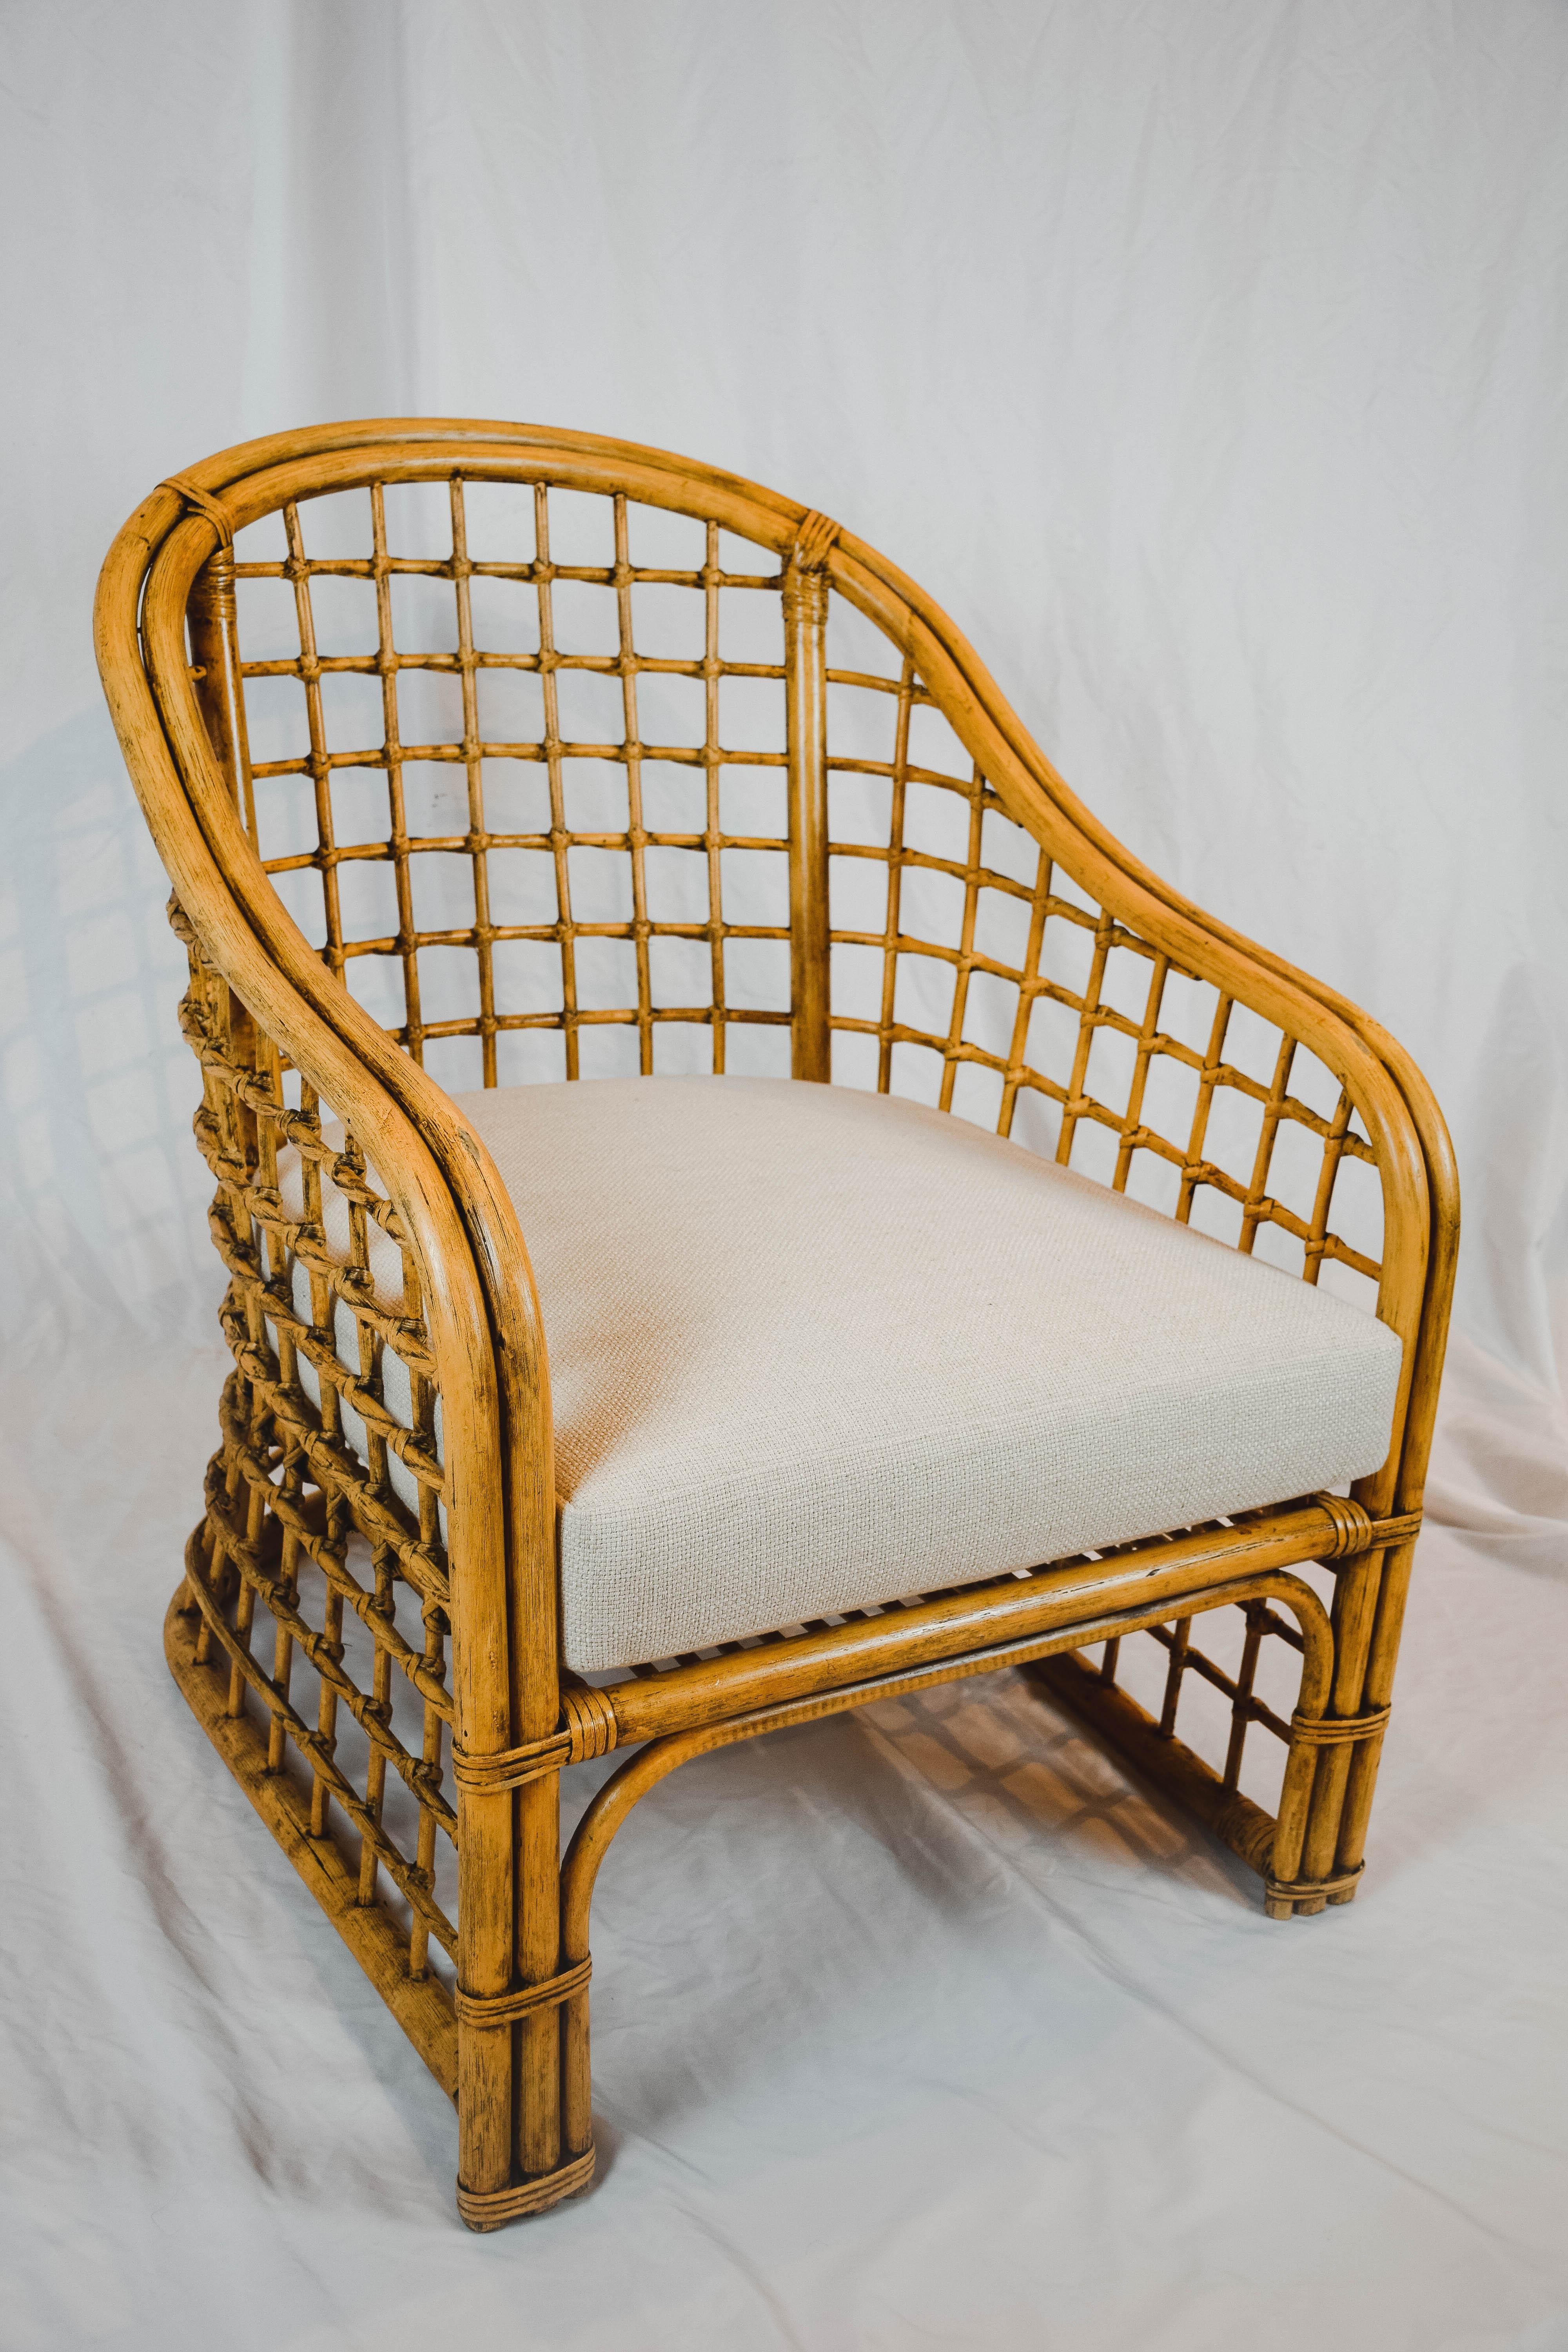 This vintage rattan lounge chair is designed for comfort and is graceful in styling. The new cushion is upholstered in a linen/poly blend that accents the contour of the chair. Strong and sturdy, this chair will add style to any home decor.